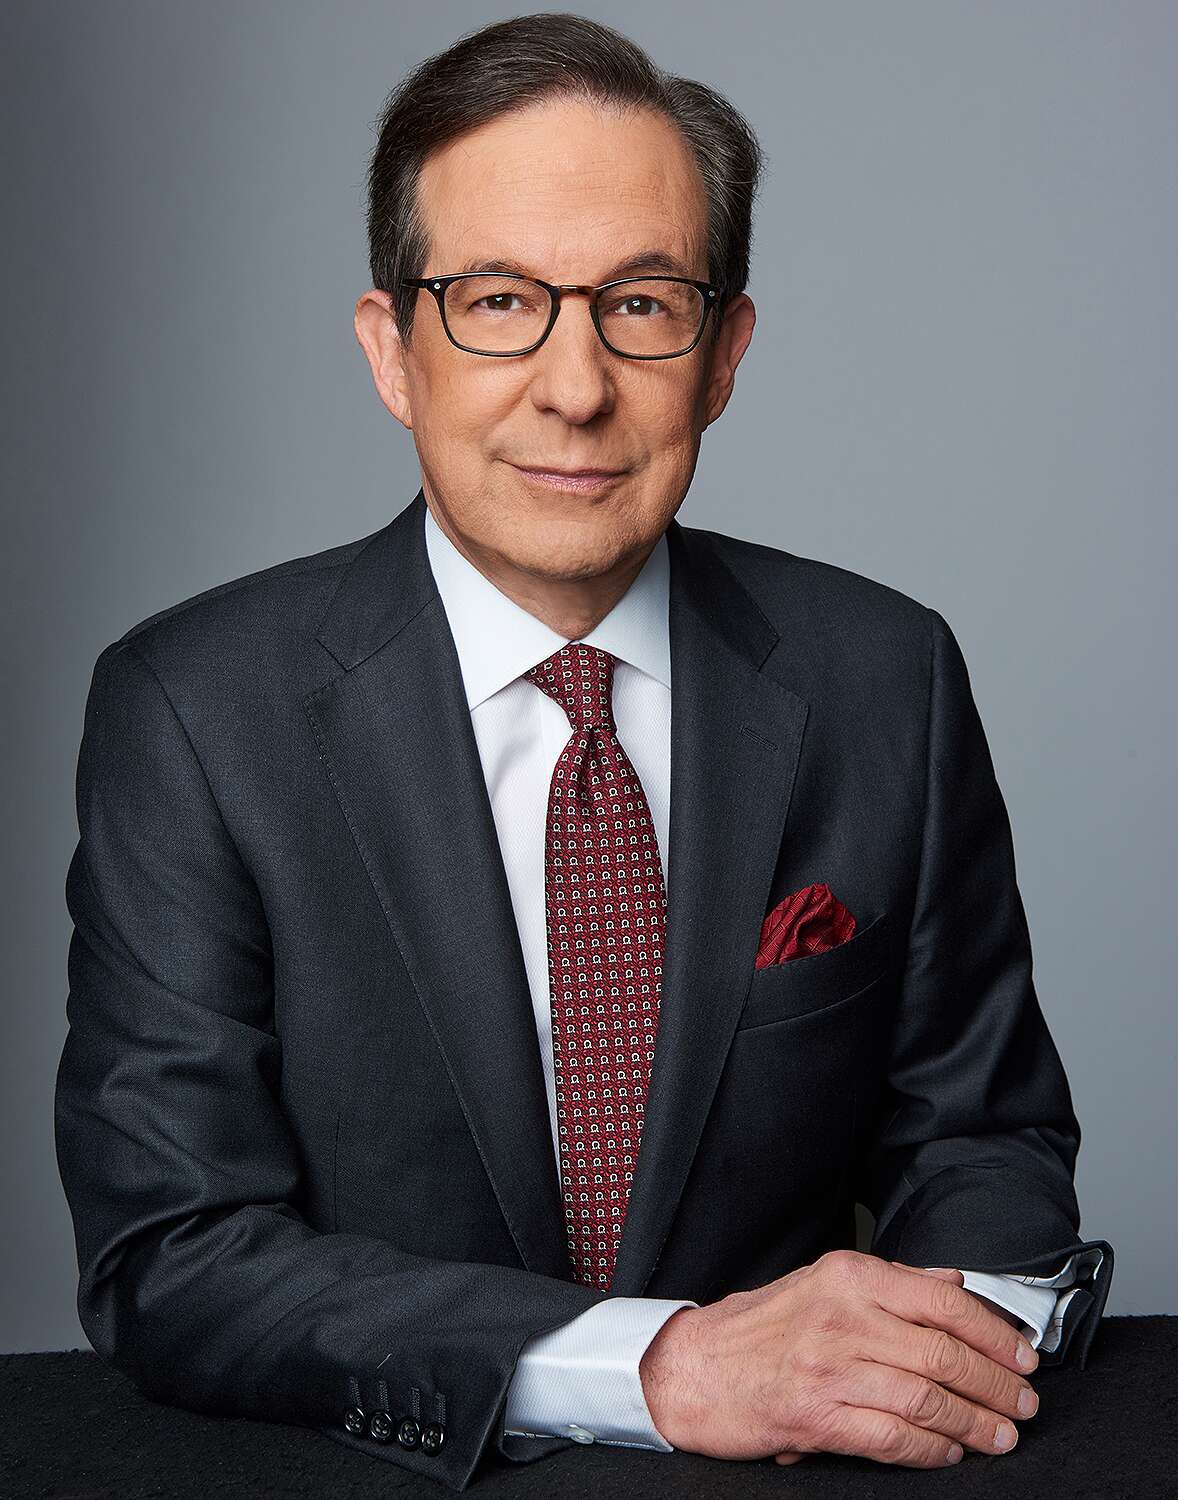 Chris Wallace Children: How Many Kids Does Chris Wallace Have?